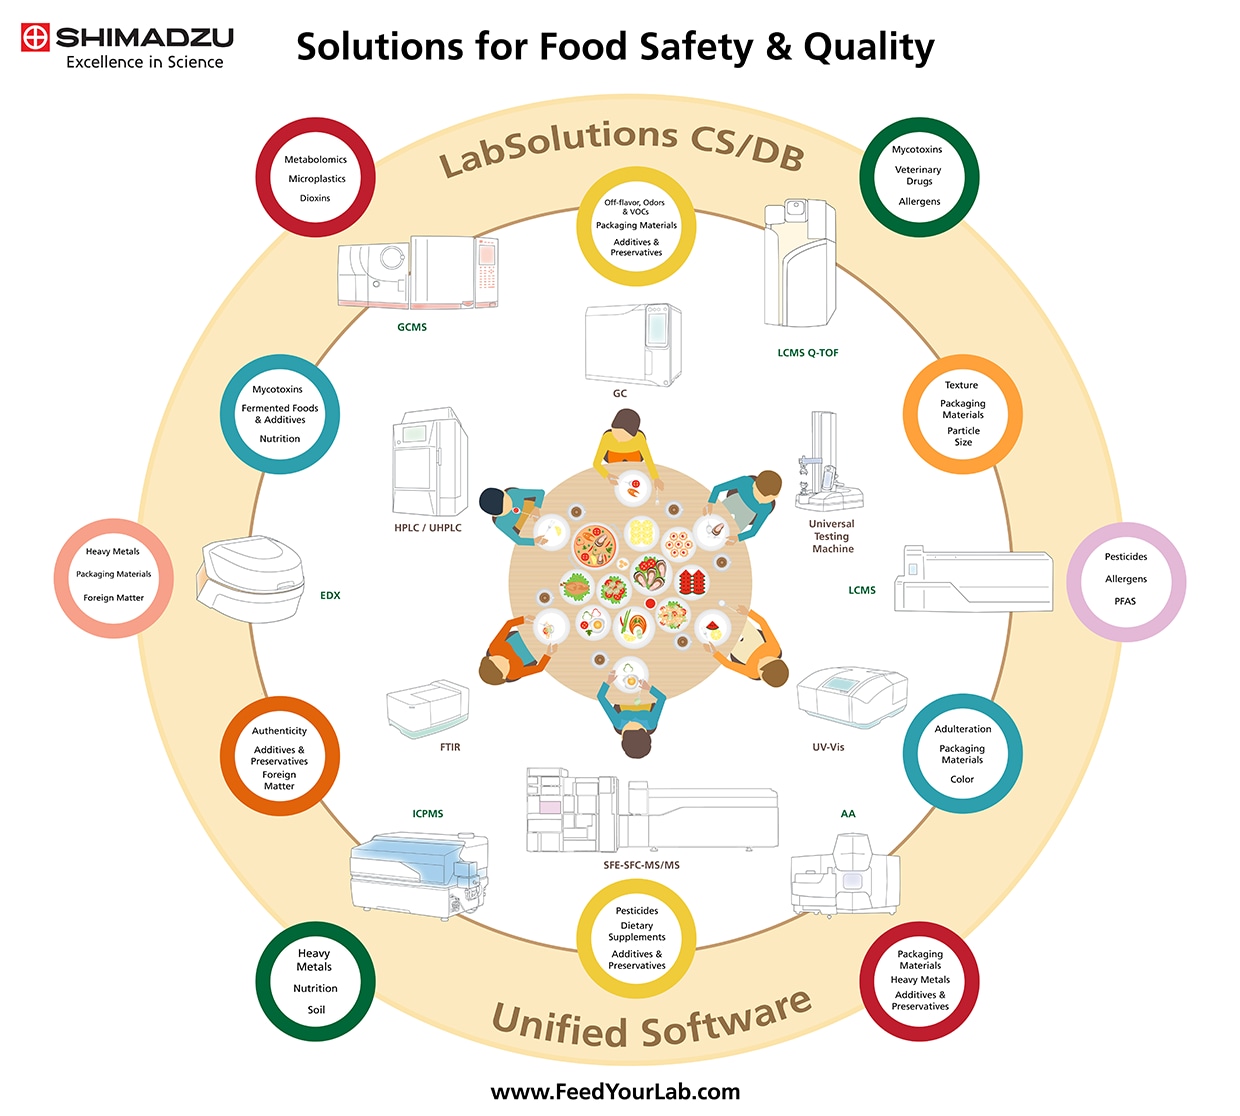 Solutions for Food Safety and Quality